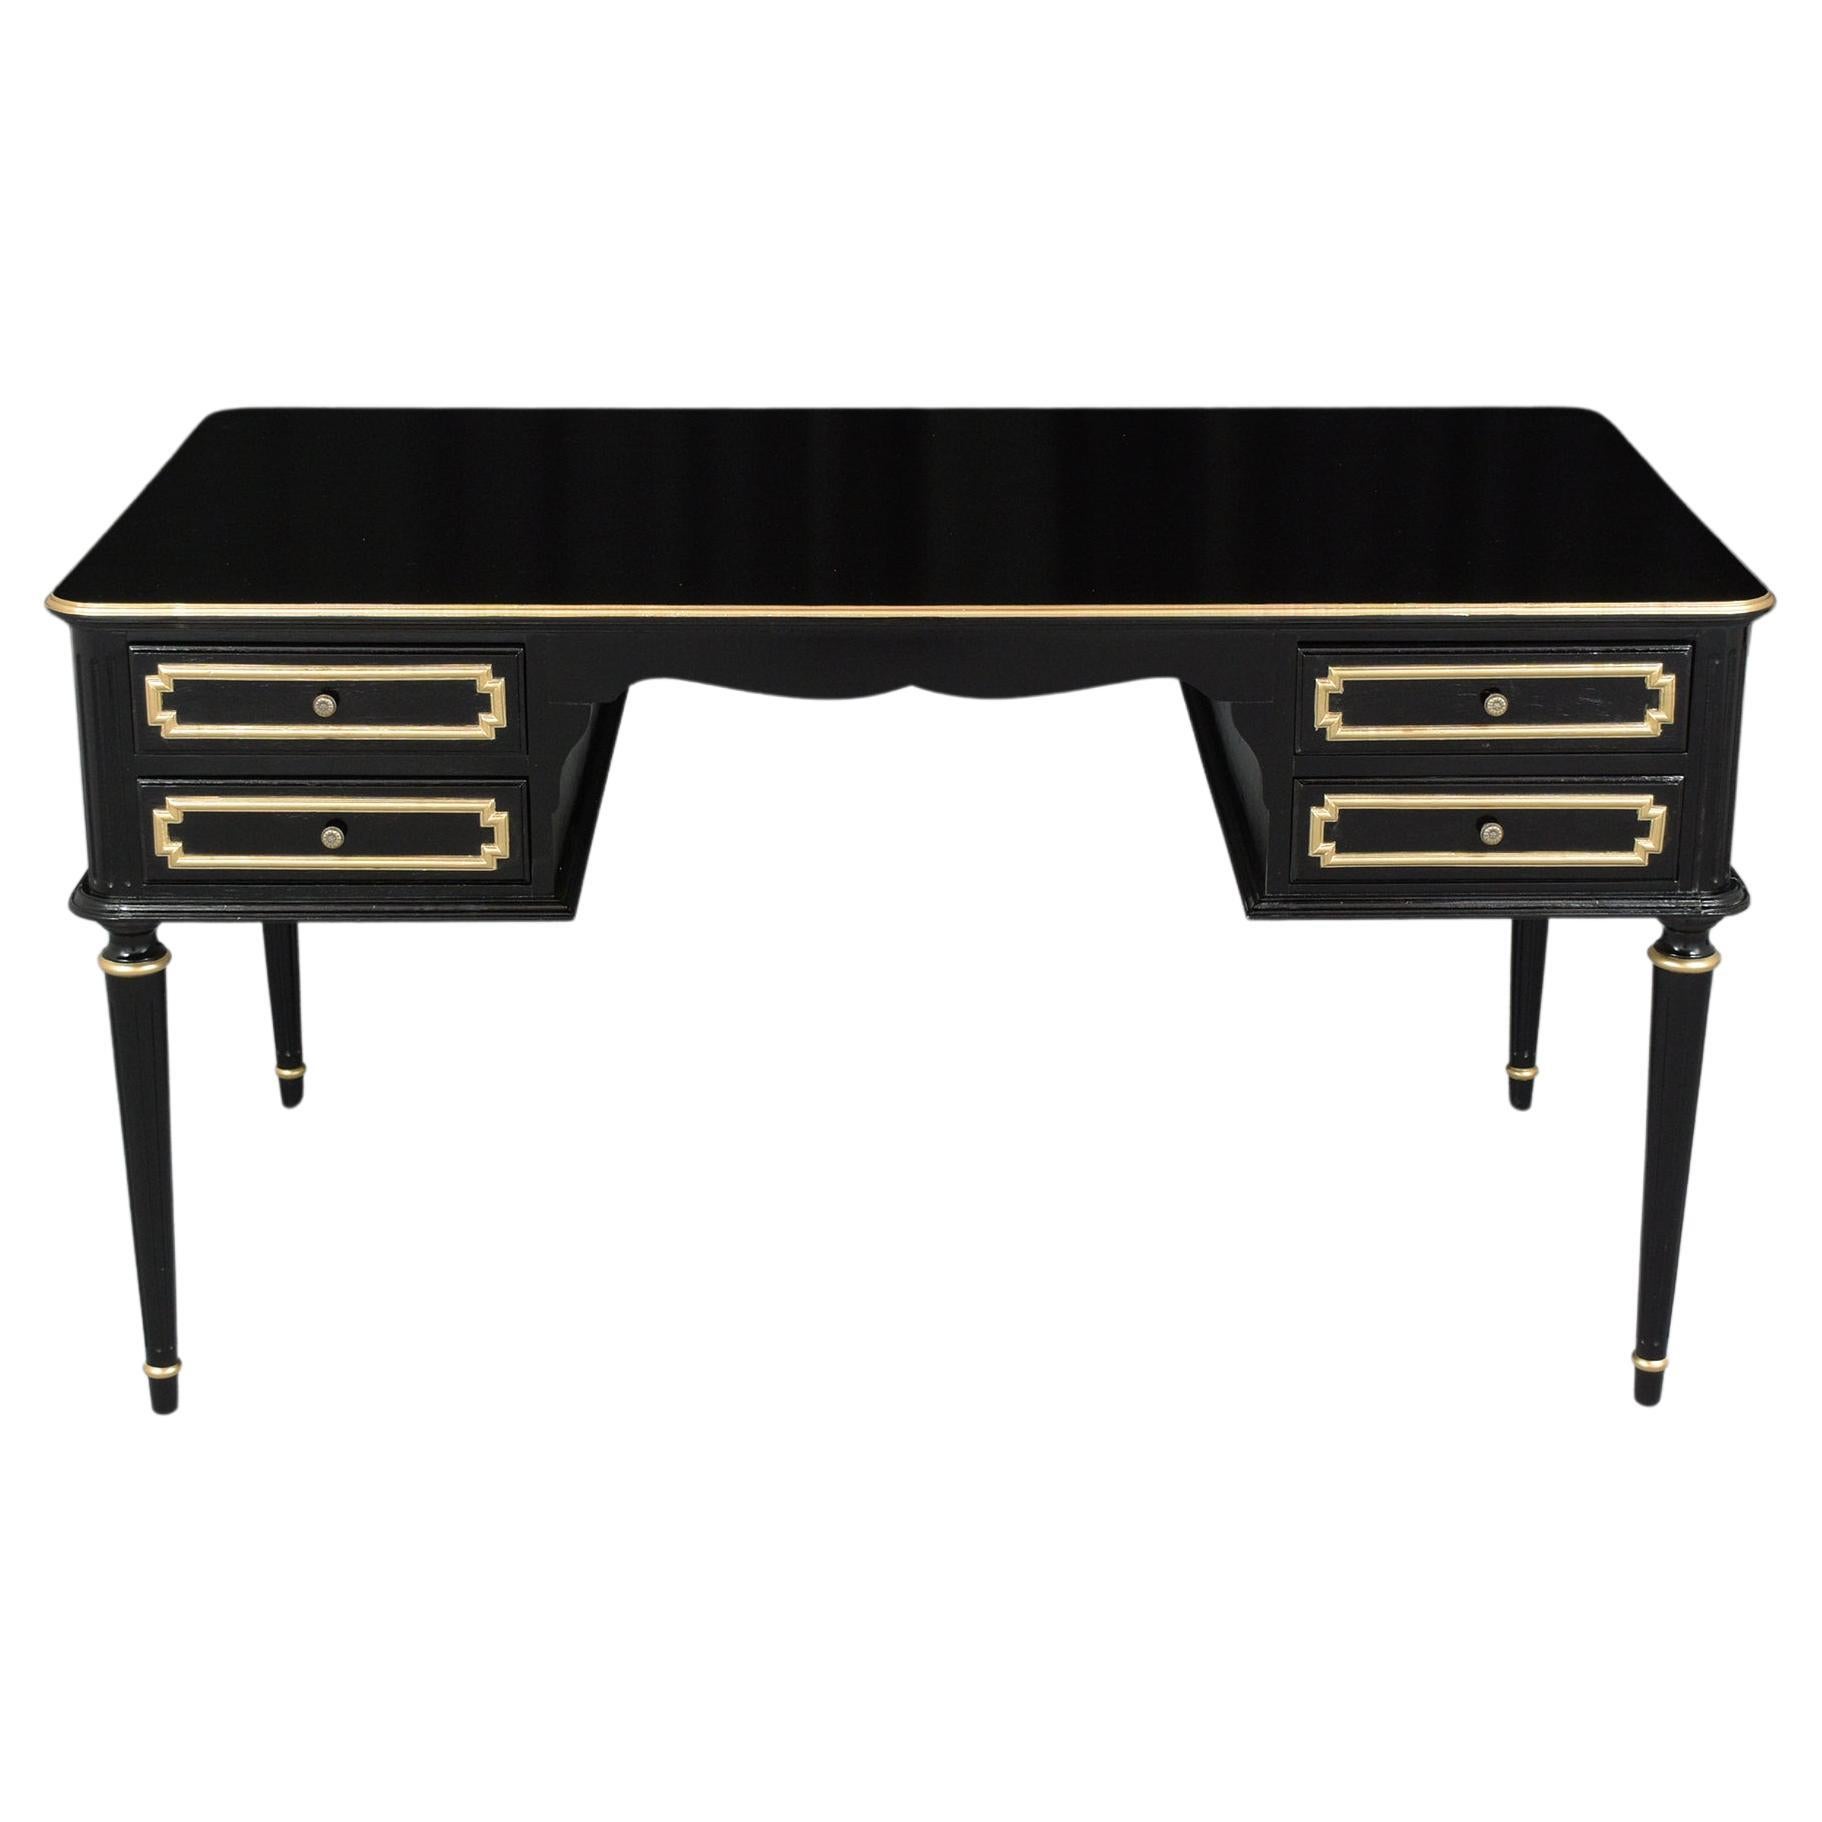 An extraordinary early 1950s Louis XVI gilt desk is hand-crafted out of solid wood in great condition and has been completely restored by our professional craftsmen team. This lovely desk features an elegant ebonized color stain with a newly